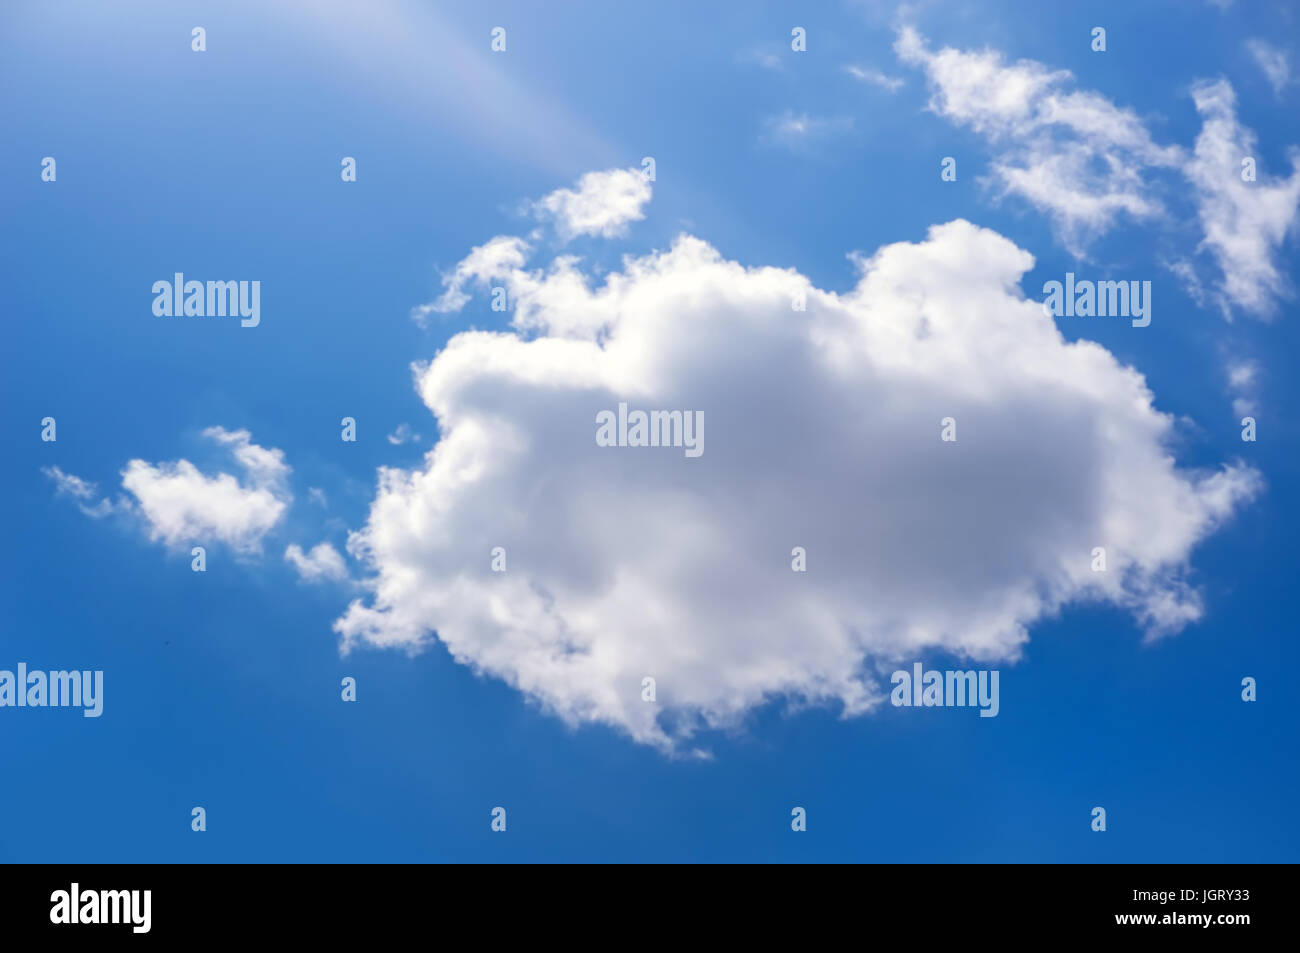 The sun is bright shining blue through a small cloud. Cumulus clouds in the blue sky. The sun shines through white cloud. Stock Photo